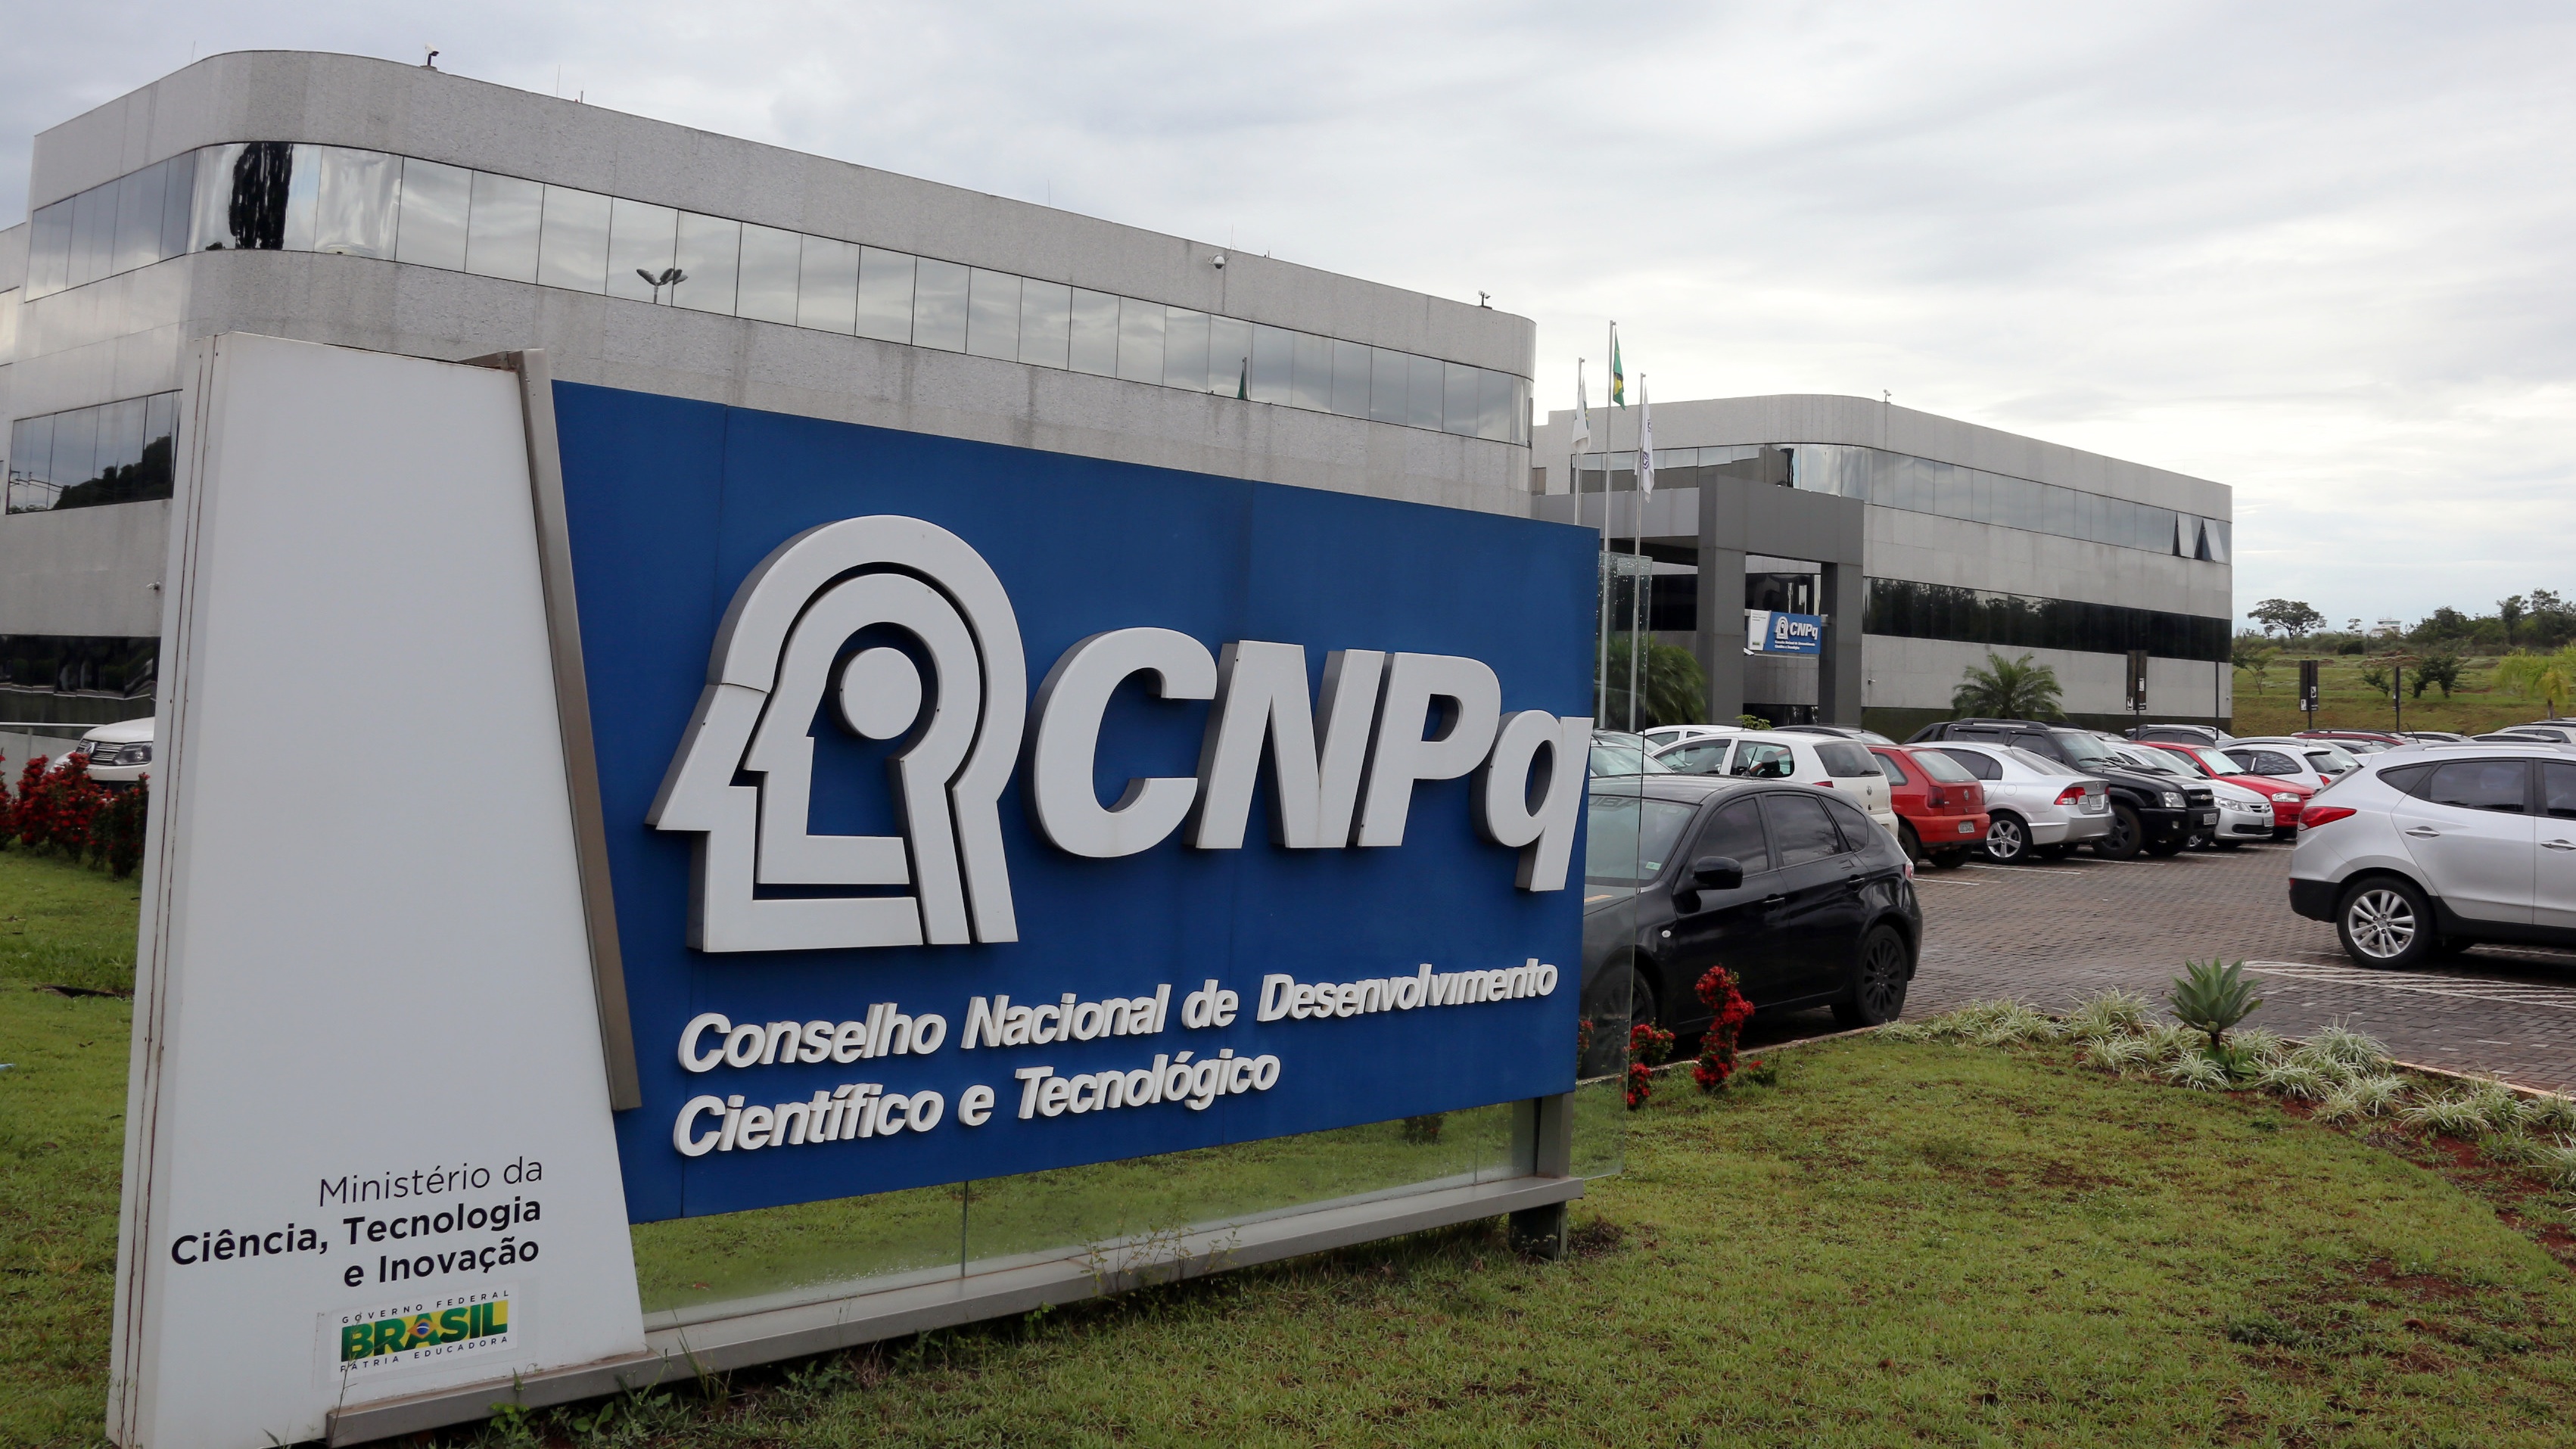 CNPq systems return after 12 days offline, but with limitations | Science